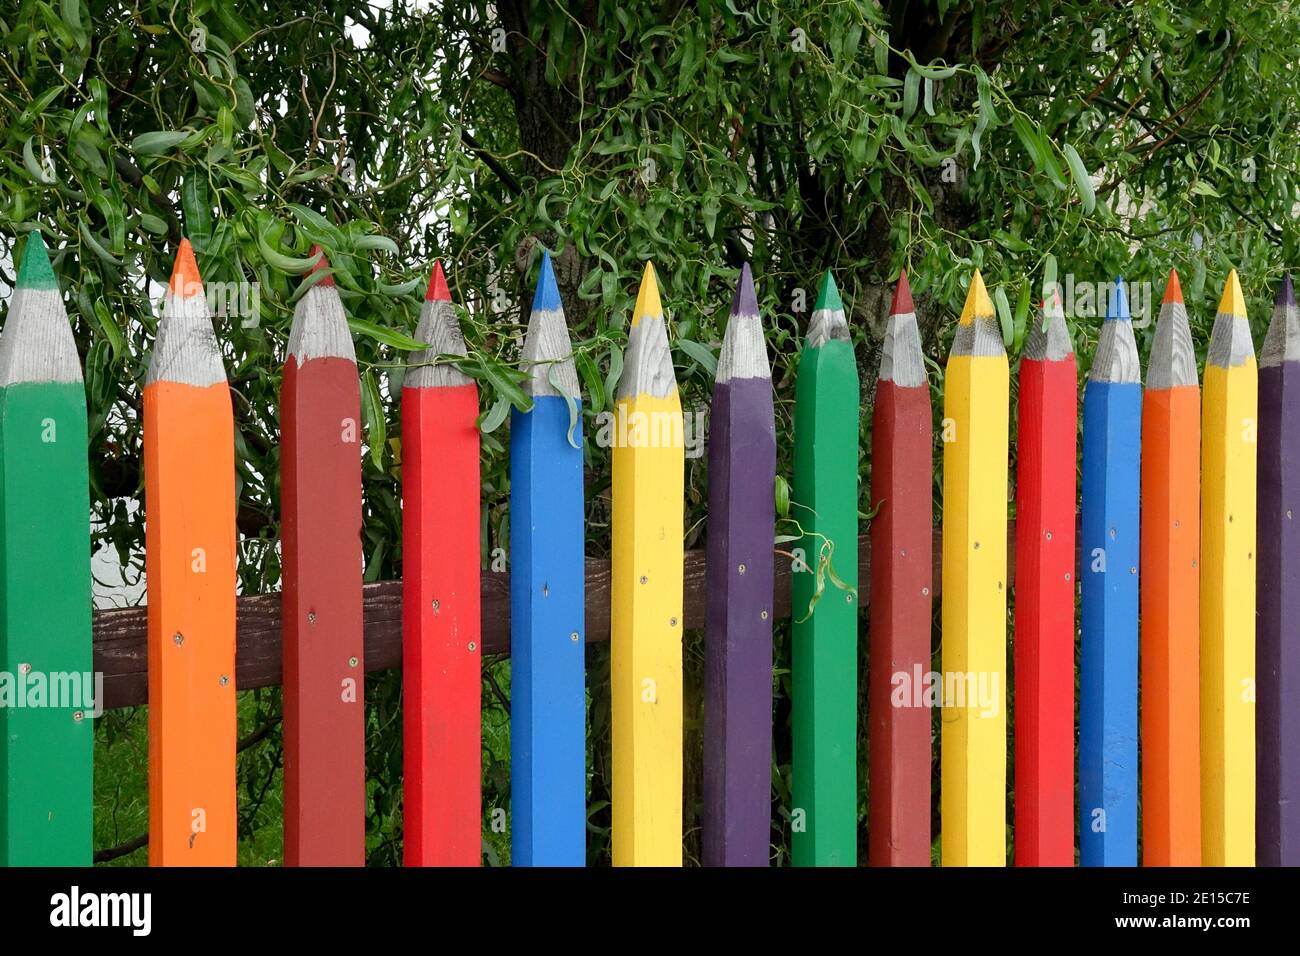 Colorful fence of pencils wooden fence garden Stock Photo